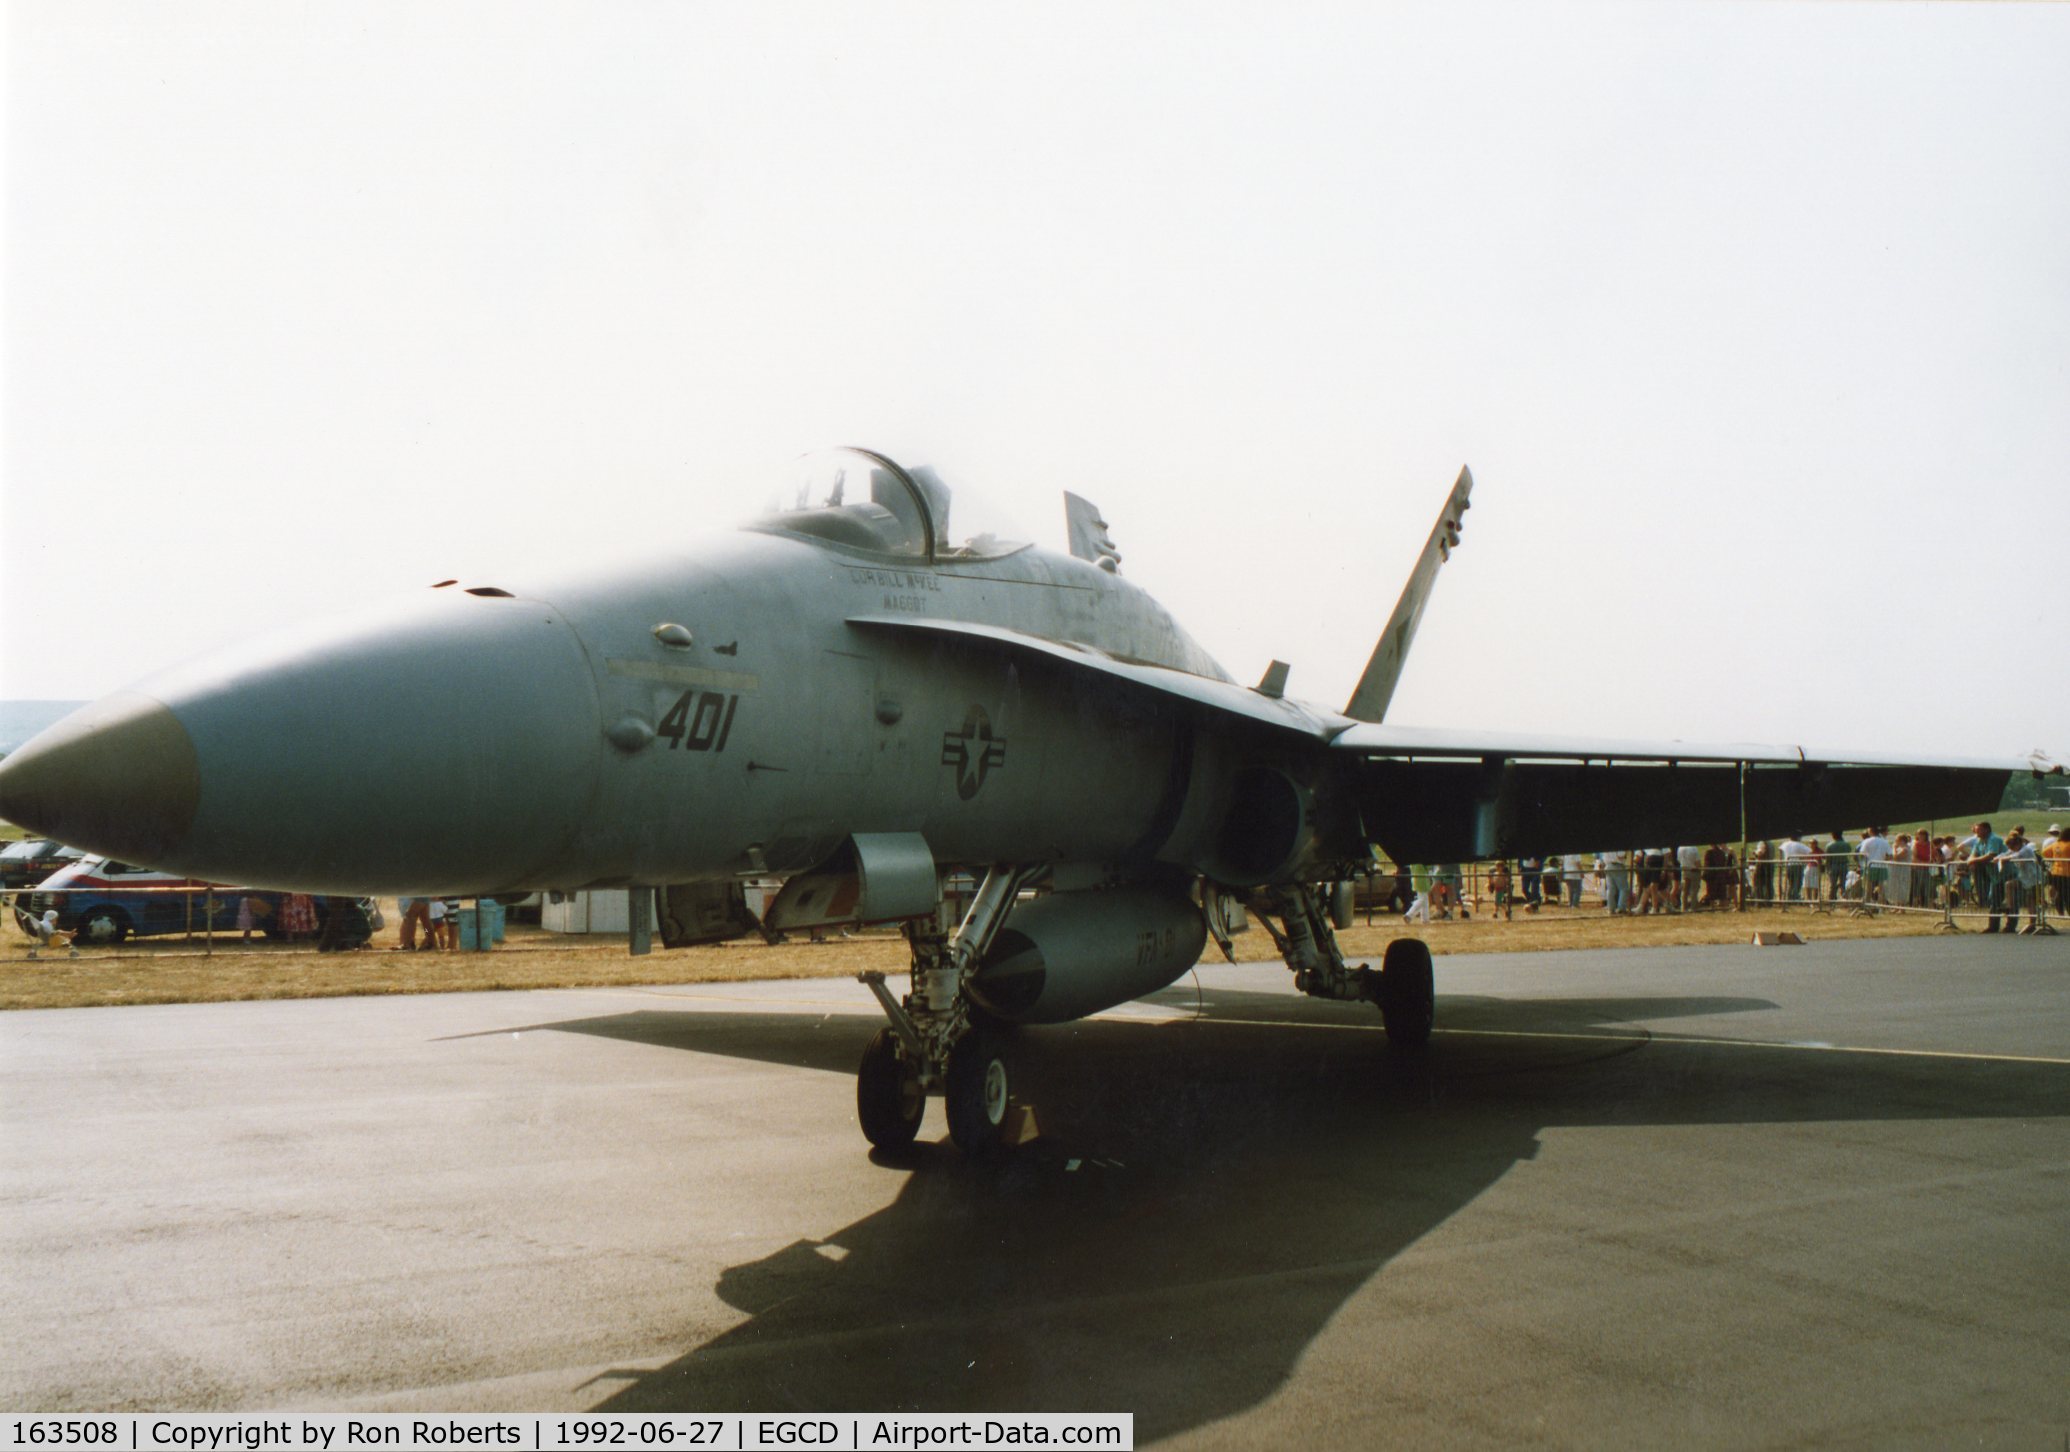 163508, 1988 McDonnell Douglas F/A-18C Hornet C/N 0754/C060, Woodford Airshow.Flew up from the Mediterranean off the USS Saratoga